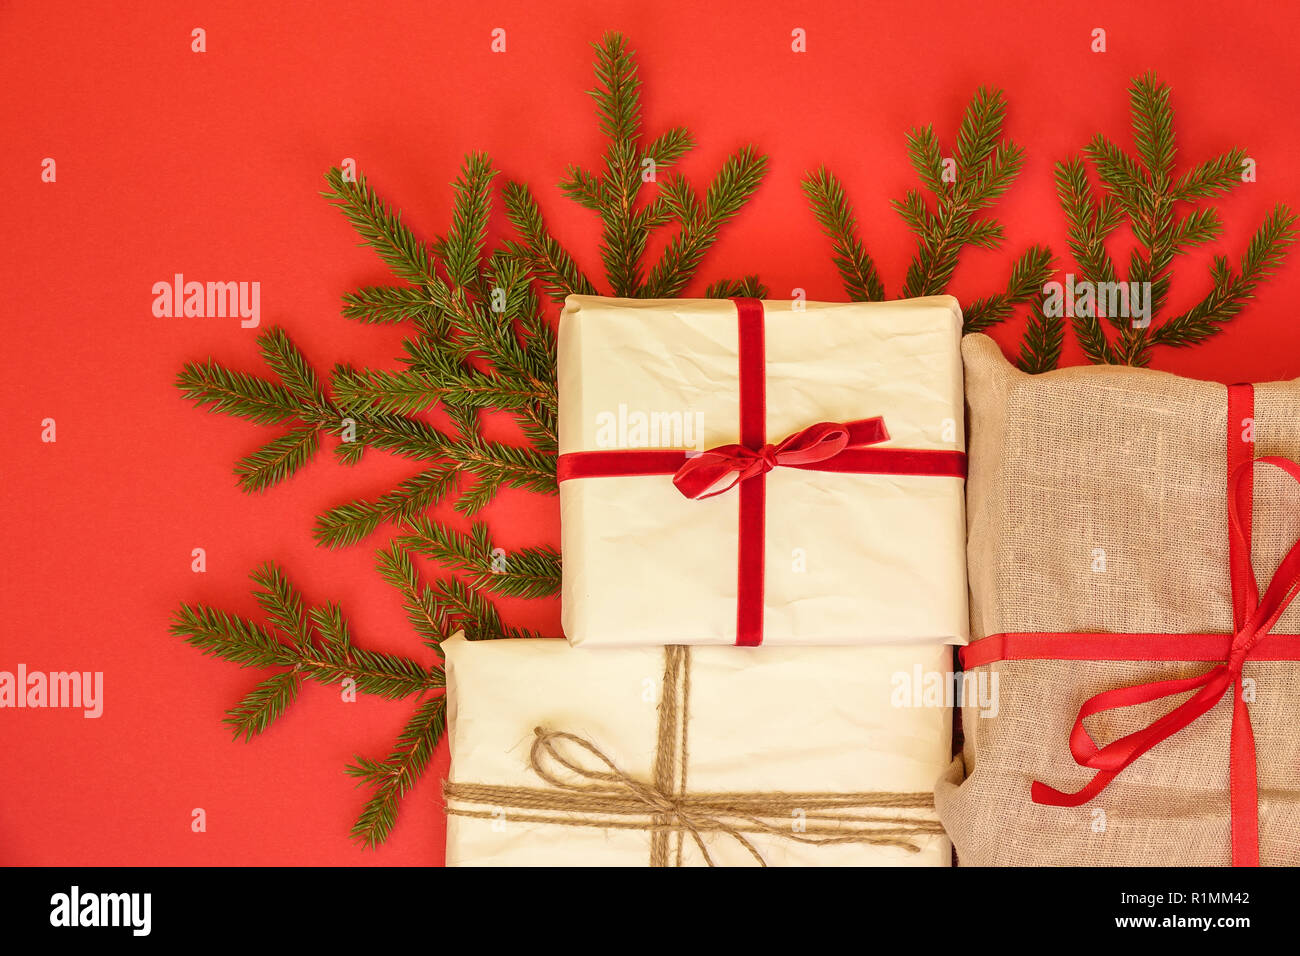 Fir branch / twig and christmas gift boxes on red background. Burlap and reused / recycled wrapping paper. Red ribbon and natural linen string. Stock Photo